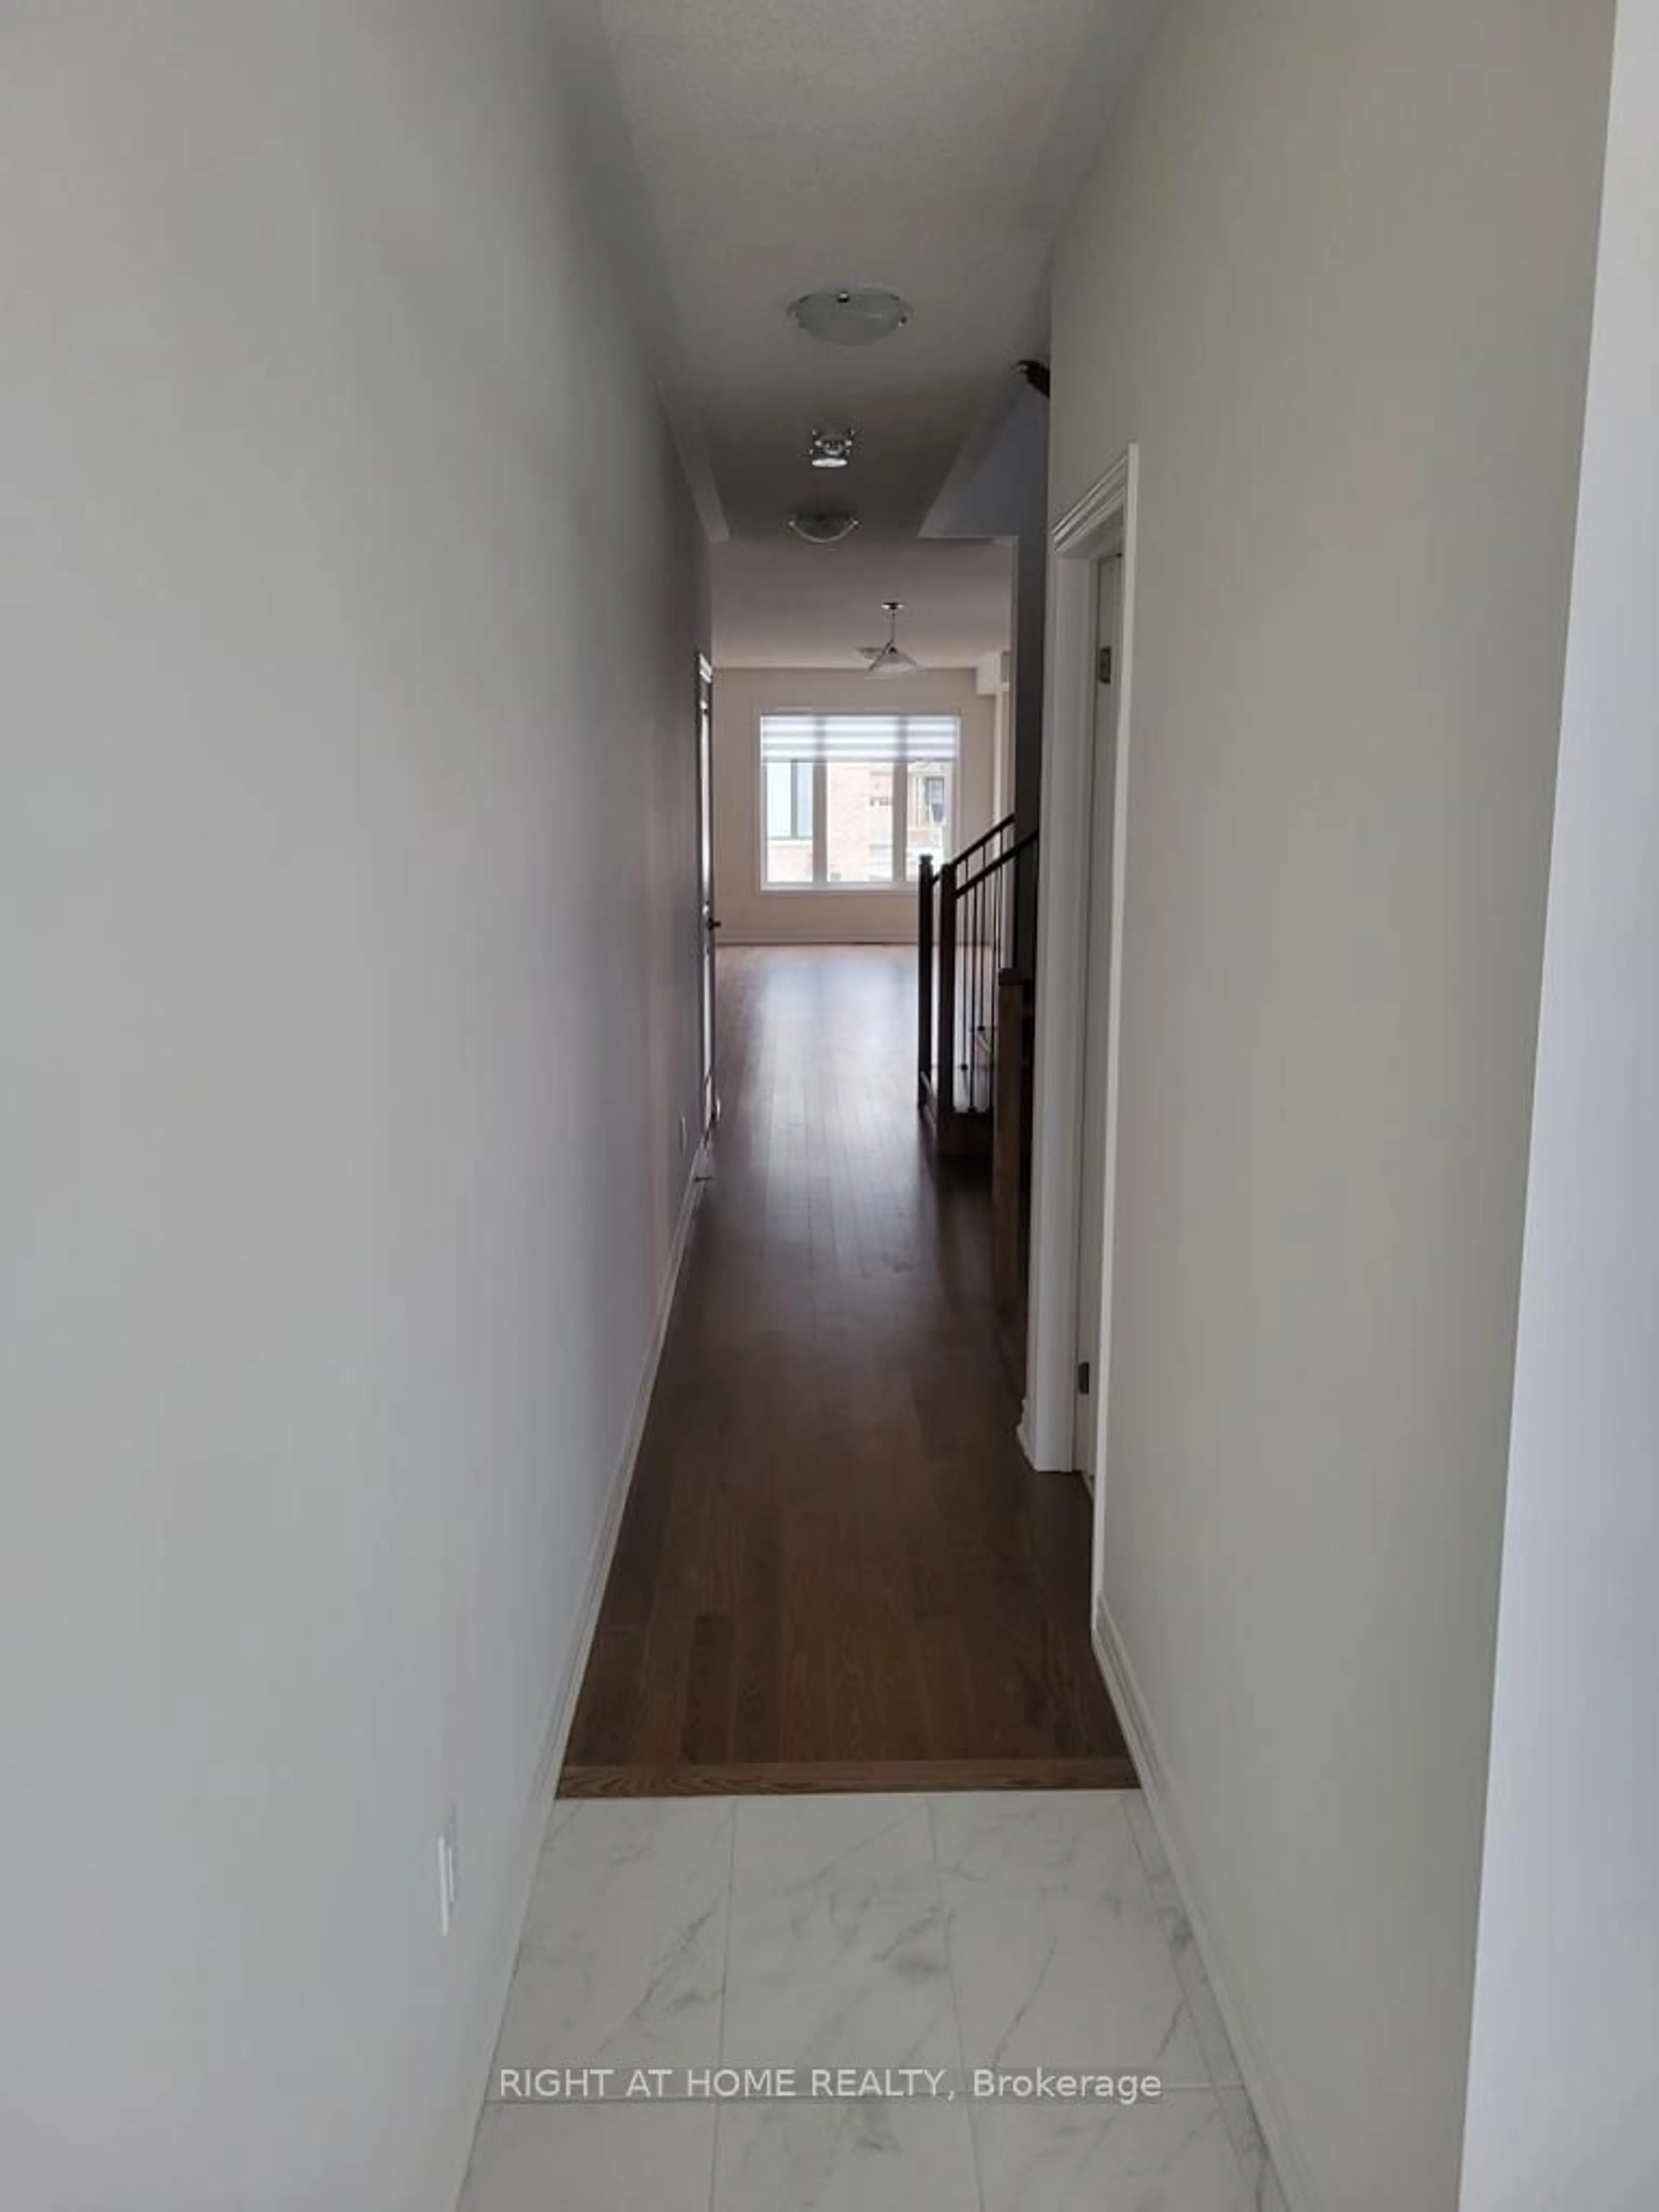 Indoor foyer for 41 Laing Dr, Whitby Ontario L1P 0N5